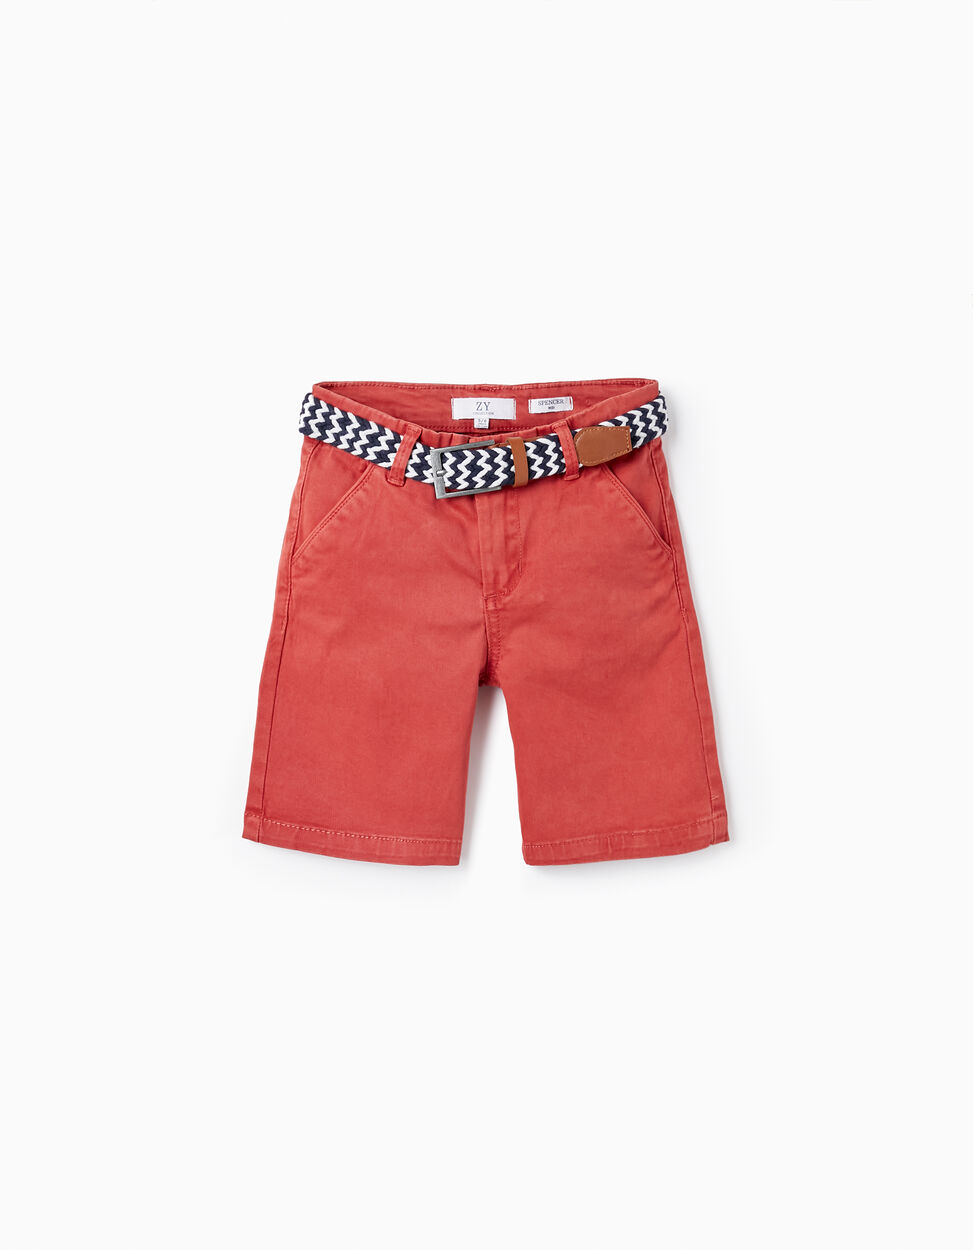 Buy Online Shorts with Belt for Boys 'Midi', Red